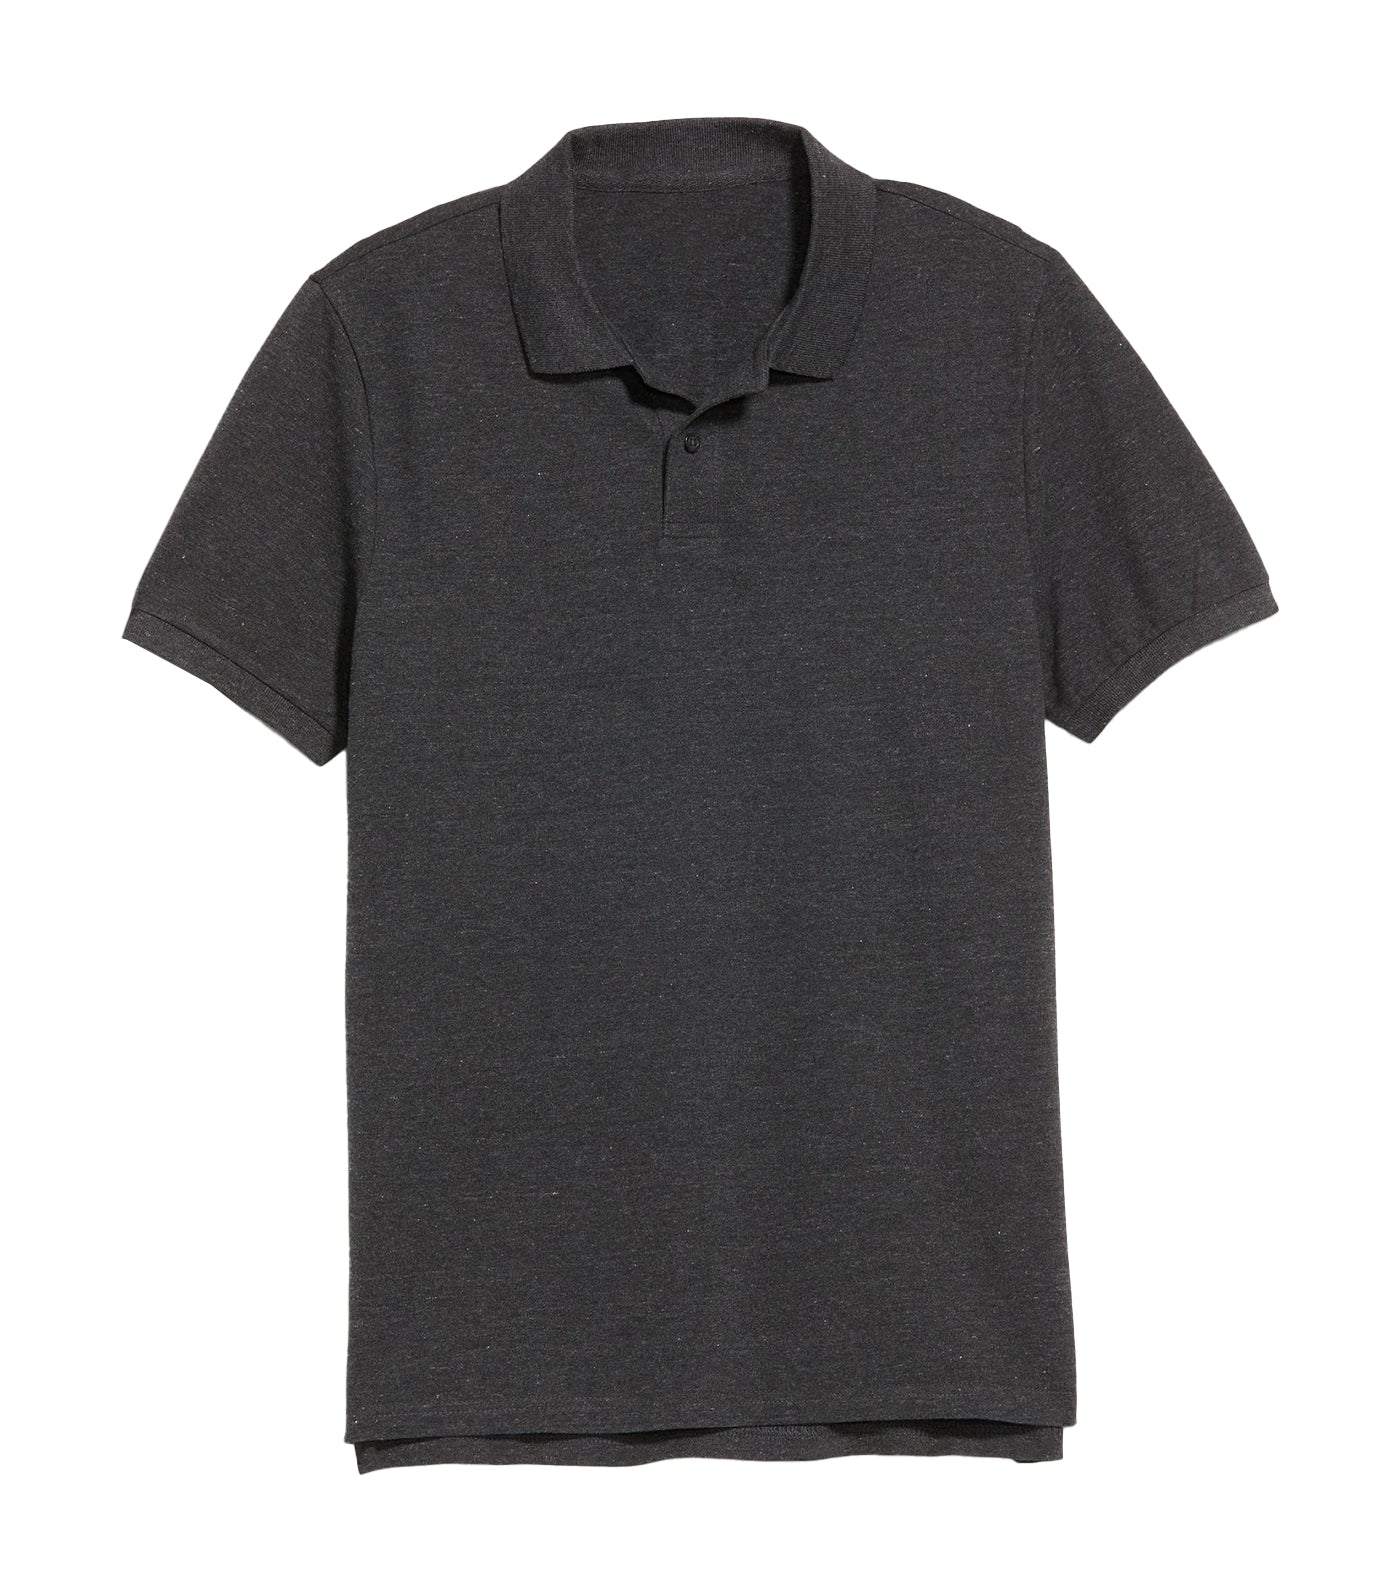 Moisture-Wicking Pique Pro Polo For Men Charcoal Heather